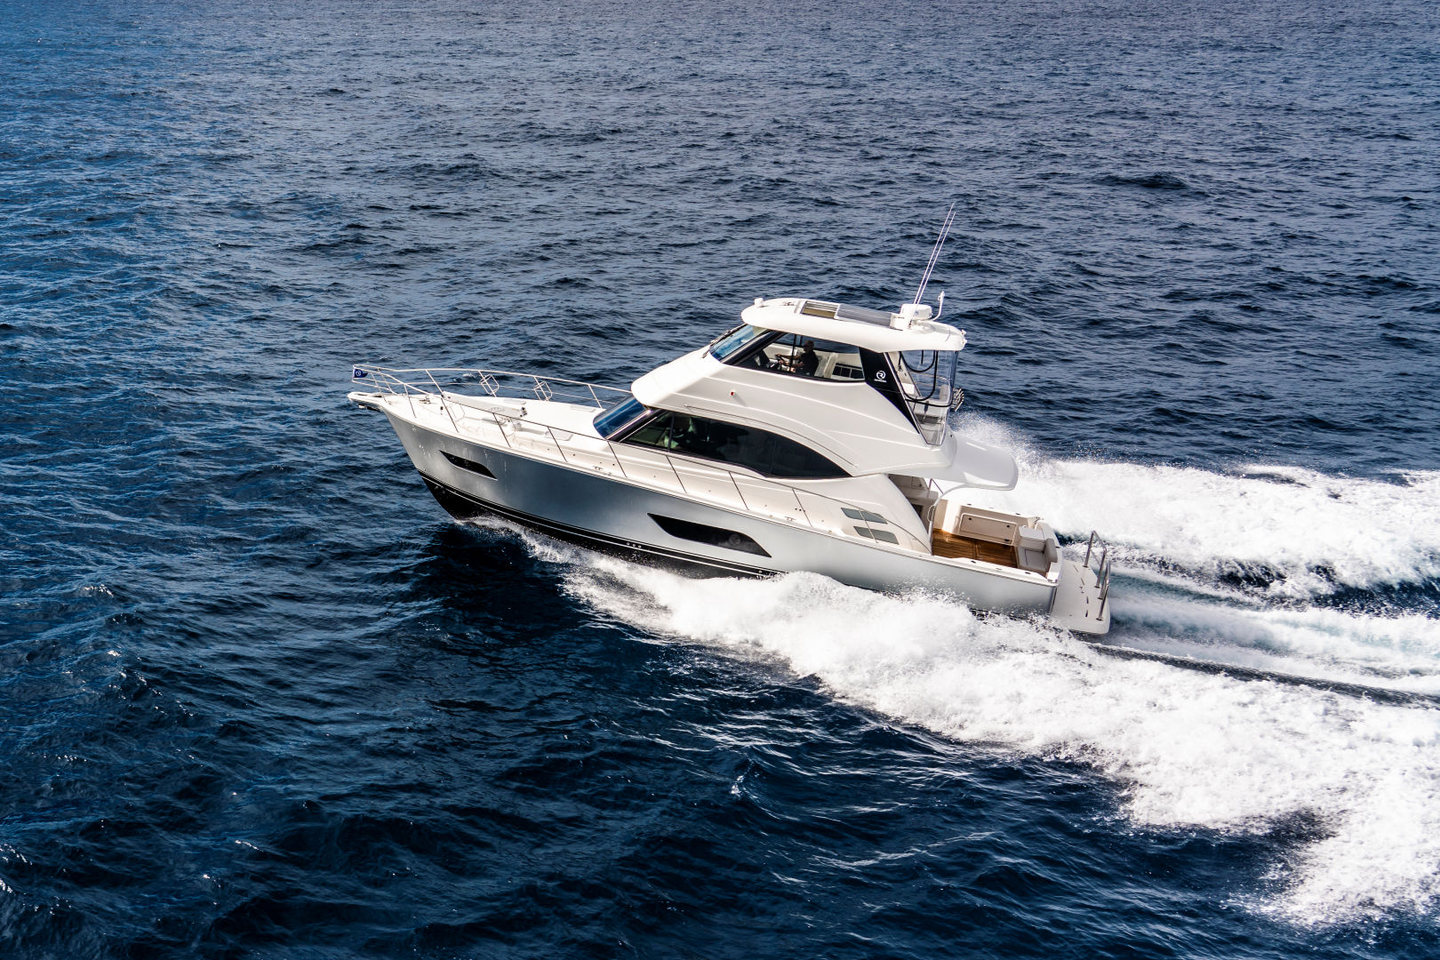 360 VR Virtual Tours of the Riviera 54 Enclosed Flybridge